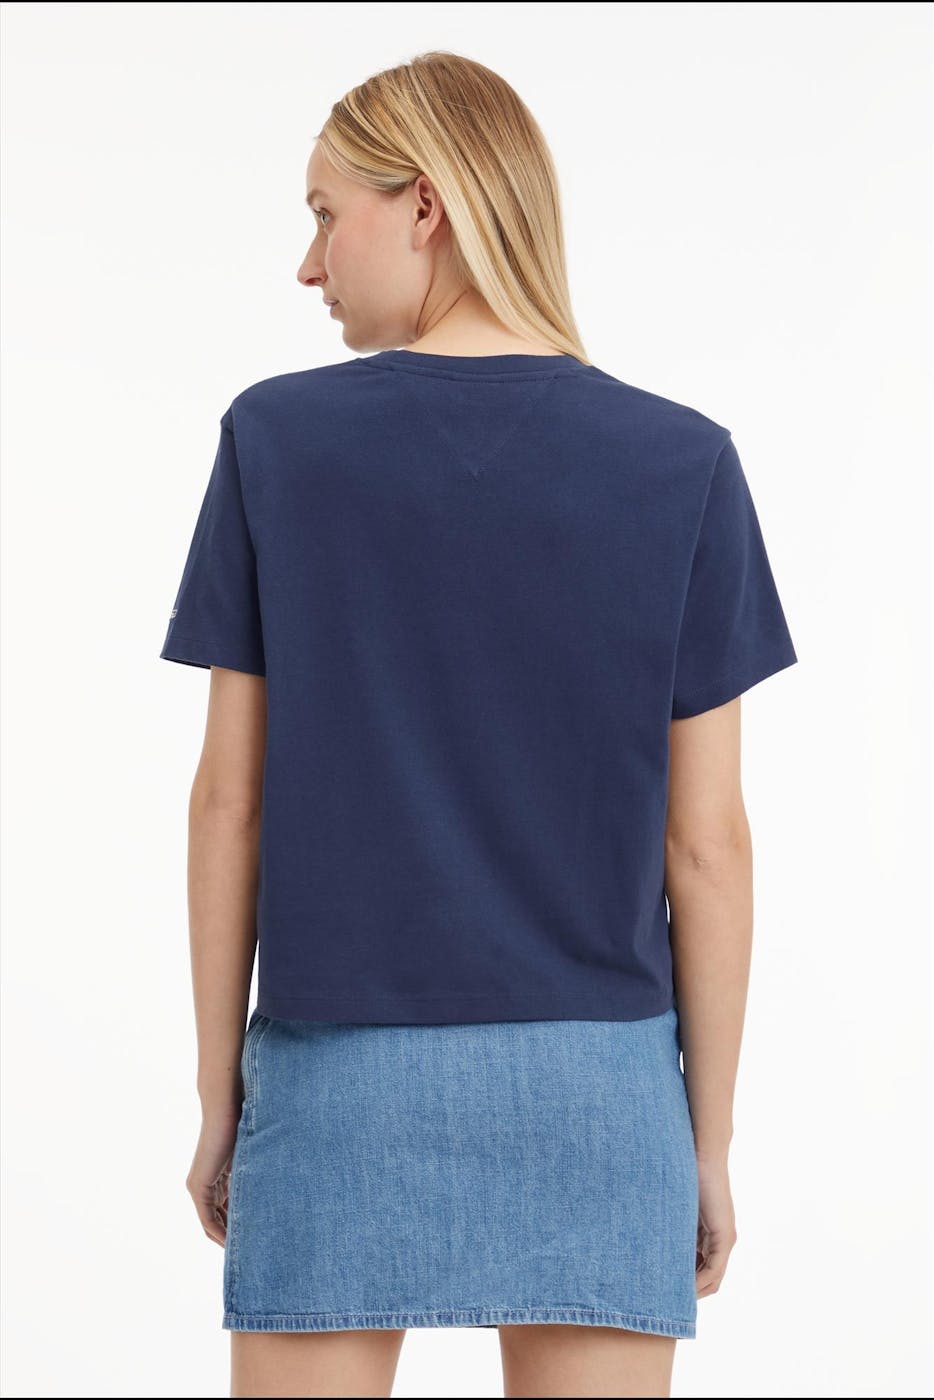 Tommy Jeans - Donkerblauwe Classic Serif T-shirt